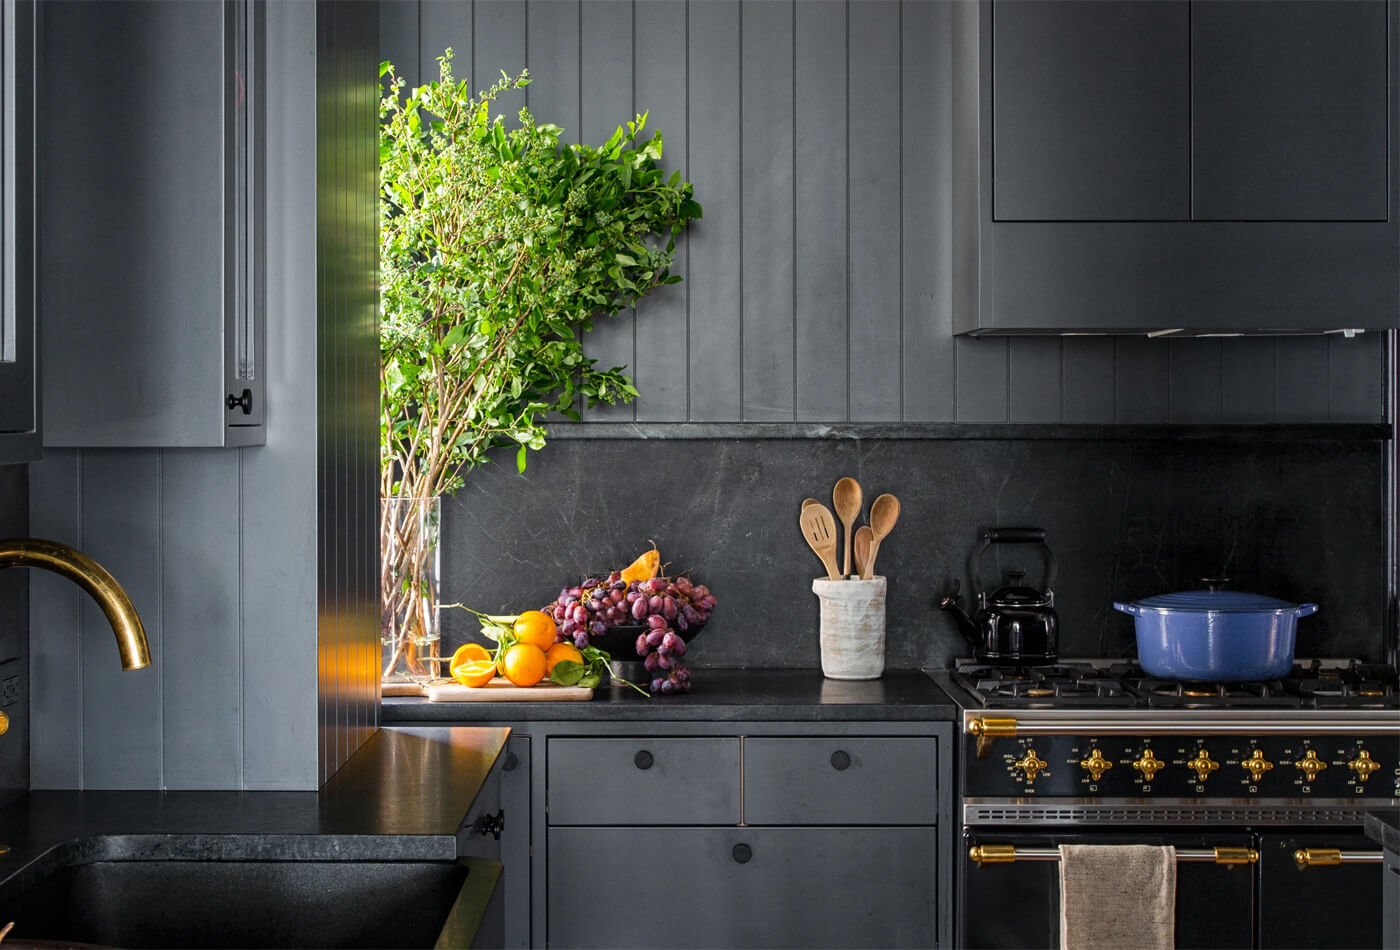 Our Dark & Moody Kitchen Reveal - Room for Tuesday